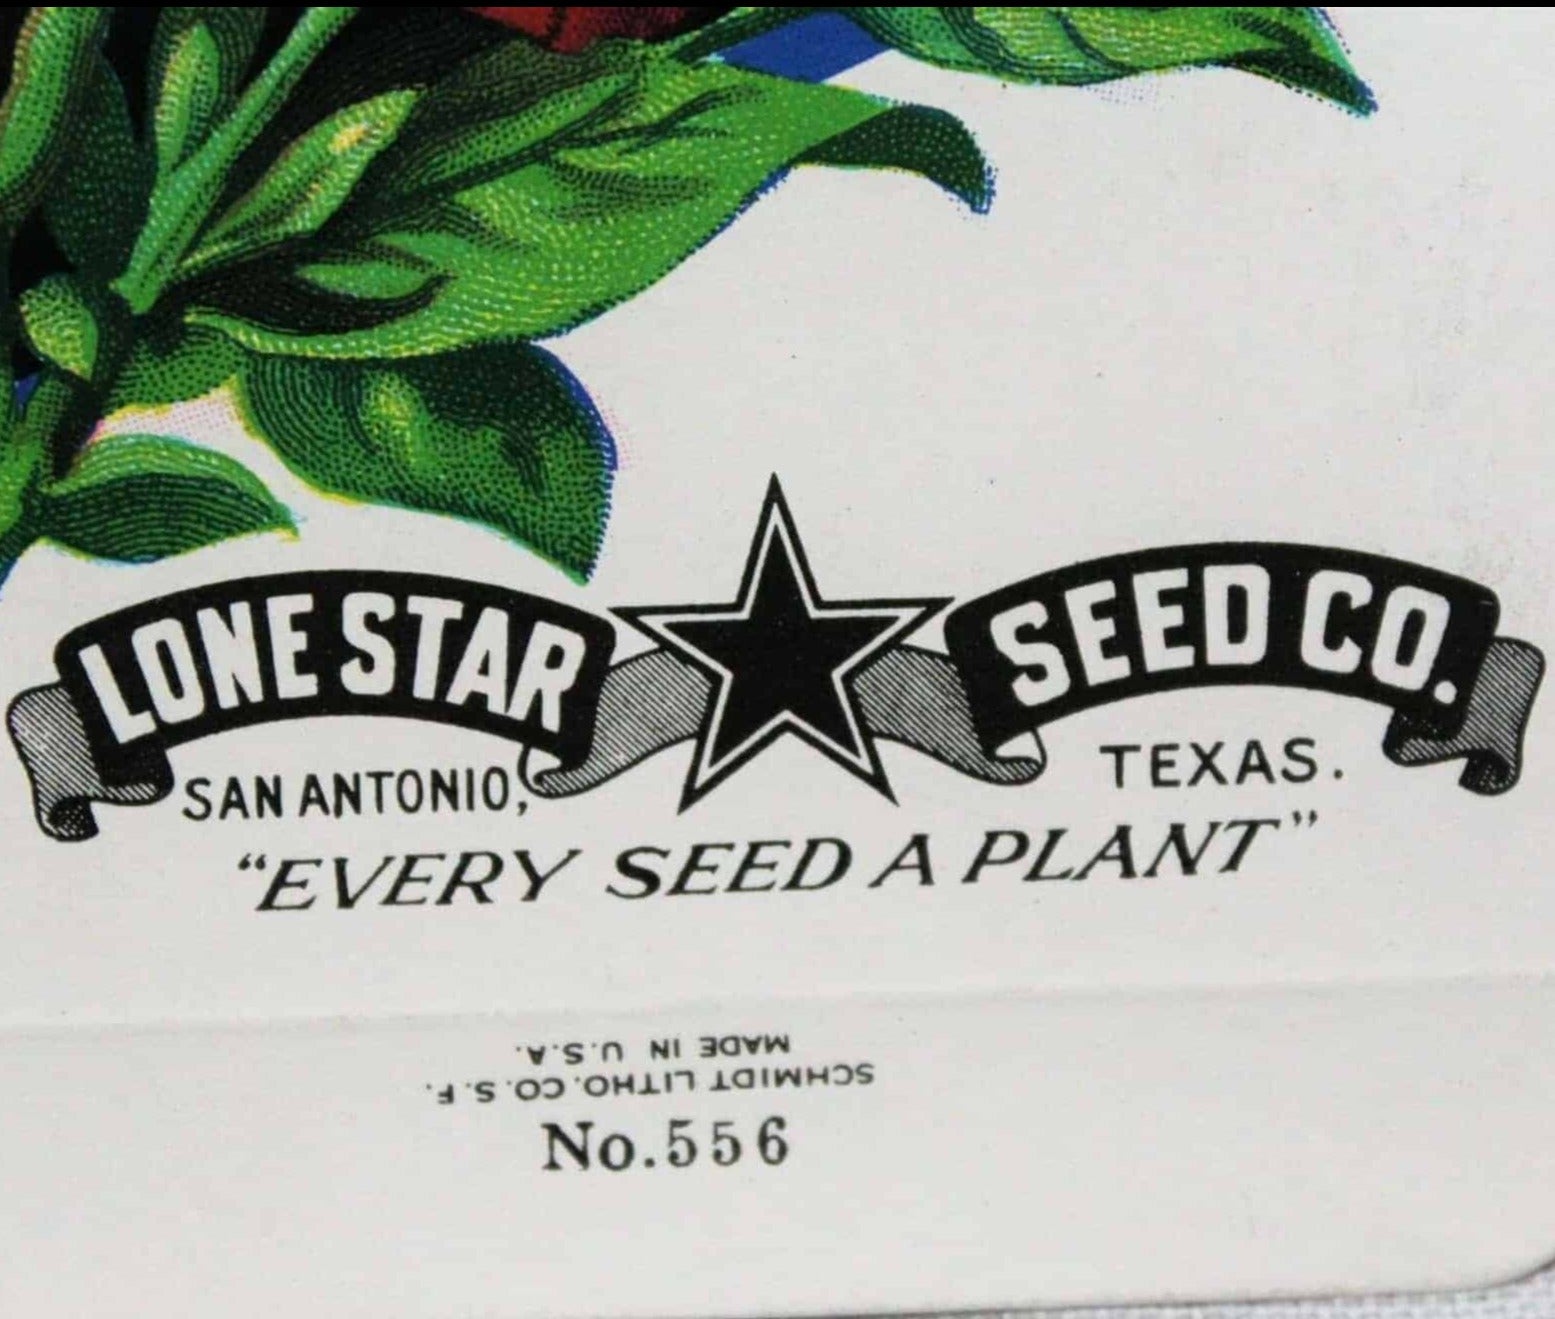 Set of 5 Different Vintage Flower Seed Packets, San Antonio, Lone